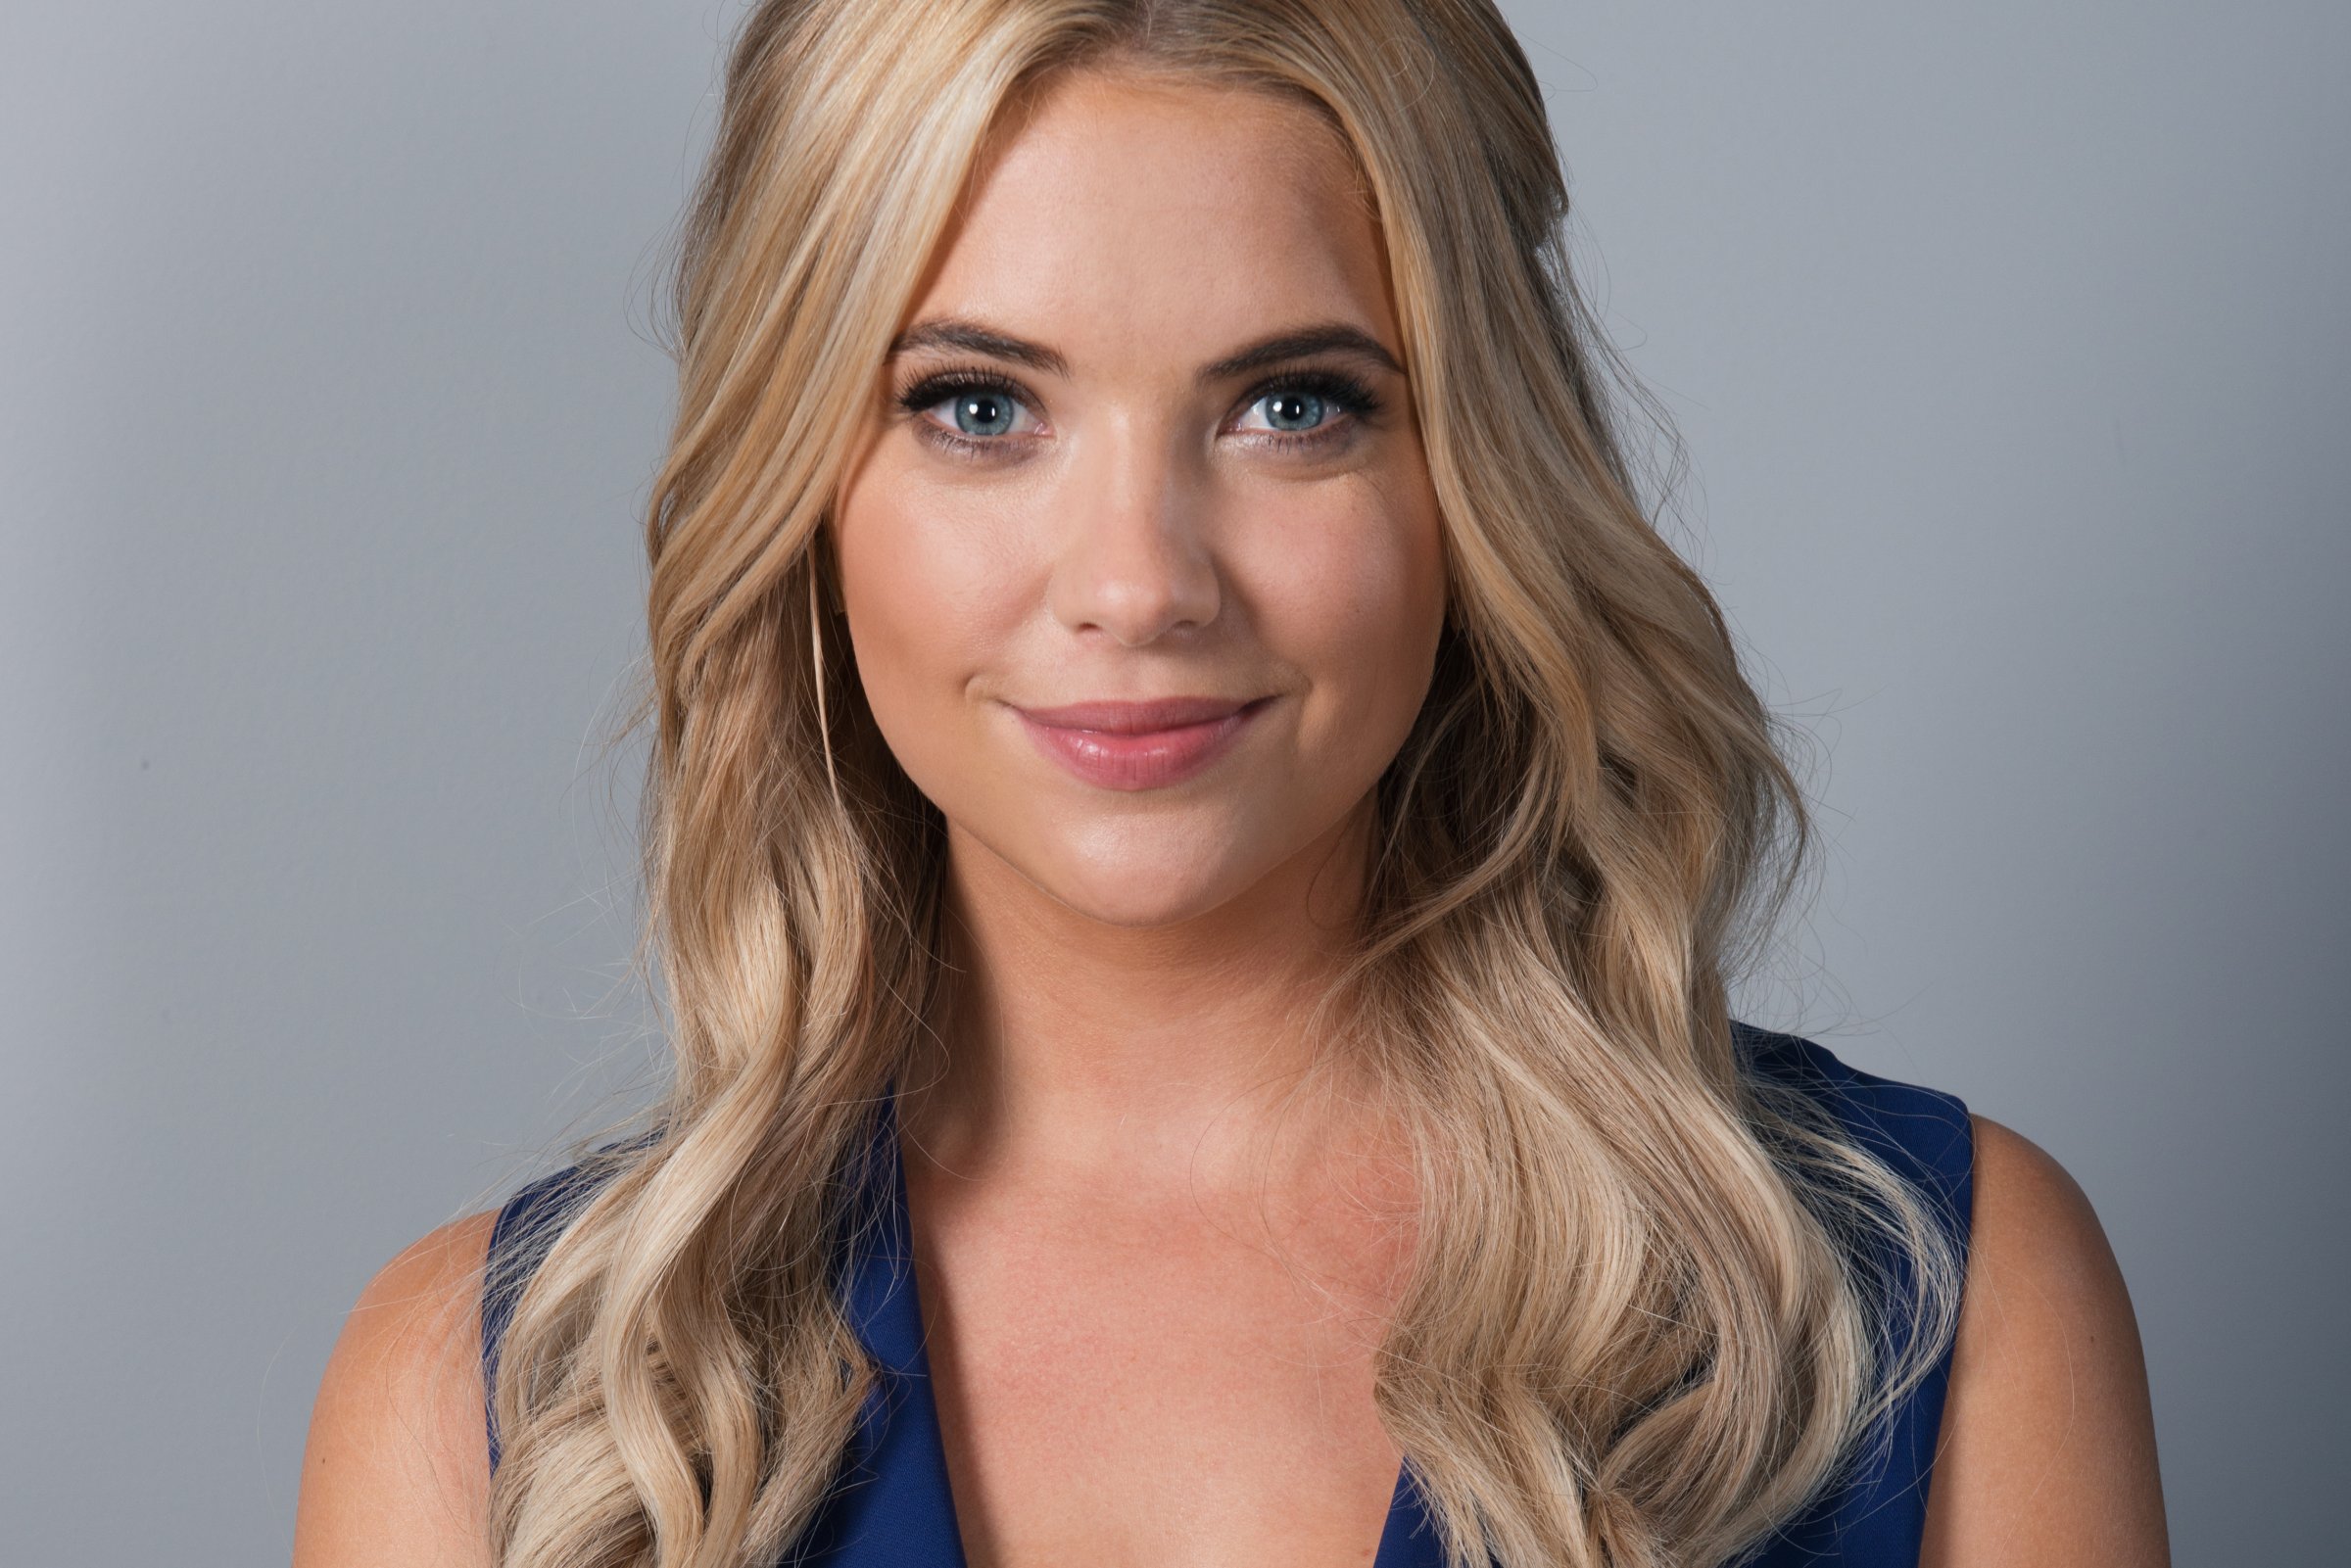 Actress Ashley Benson poses for a portrait on July 23, 2015 in New York City.